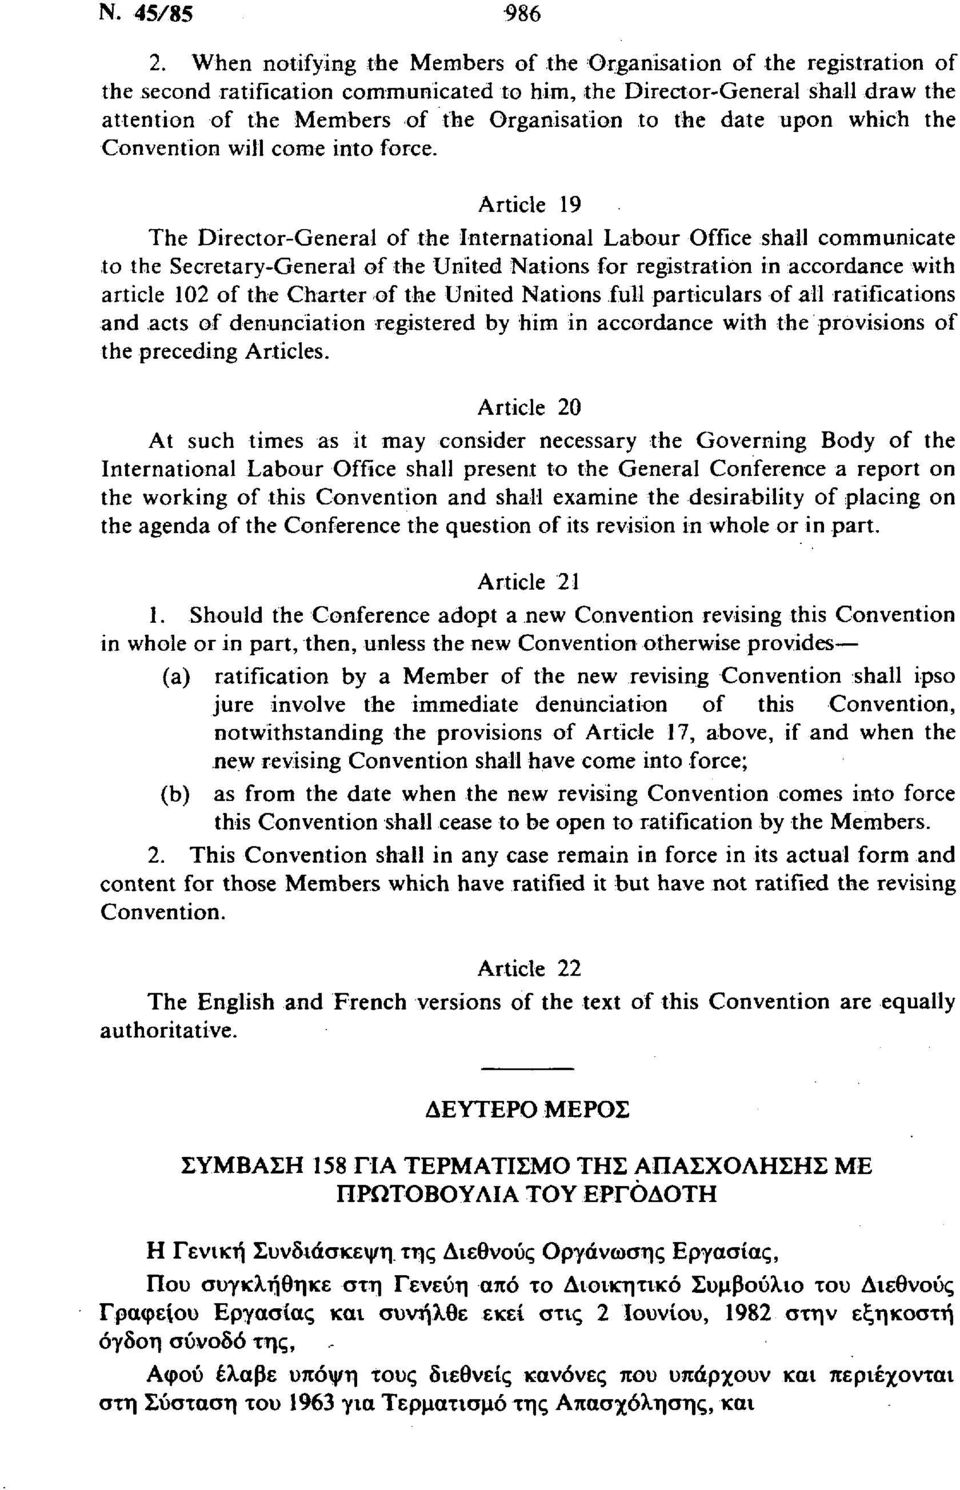 the date upon which the Convention will come into force.